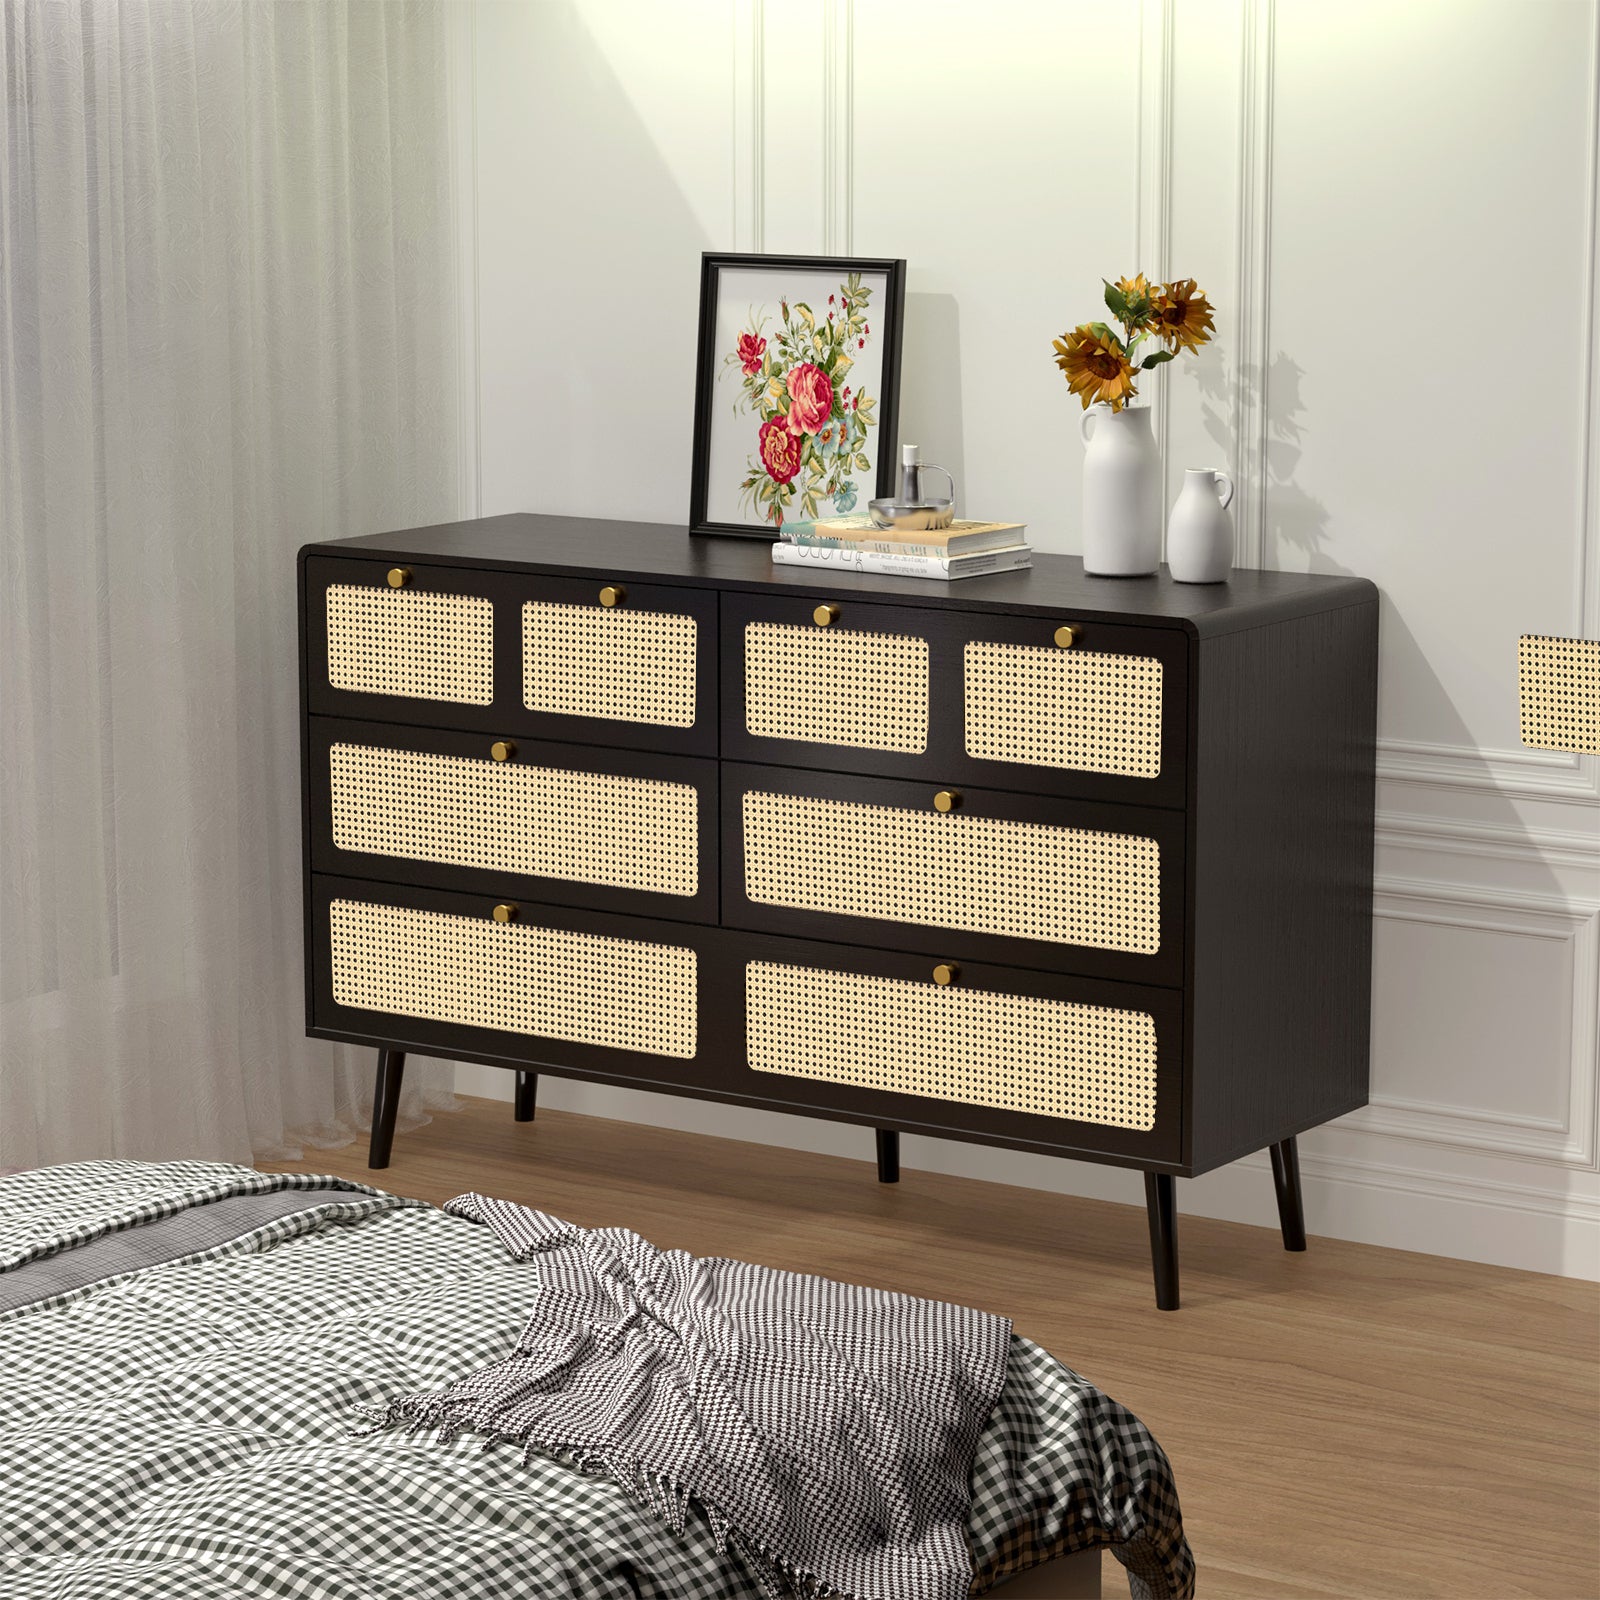 🆓🚛 6 Drawer Dresser, Modern Rattan Dresser Chest With Wide Drawers & Metal Handles, Farmhouse Wood Storage Chest of Drawers for Bedroom, Living Room, Hallway, Entryway